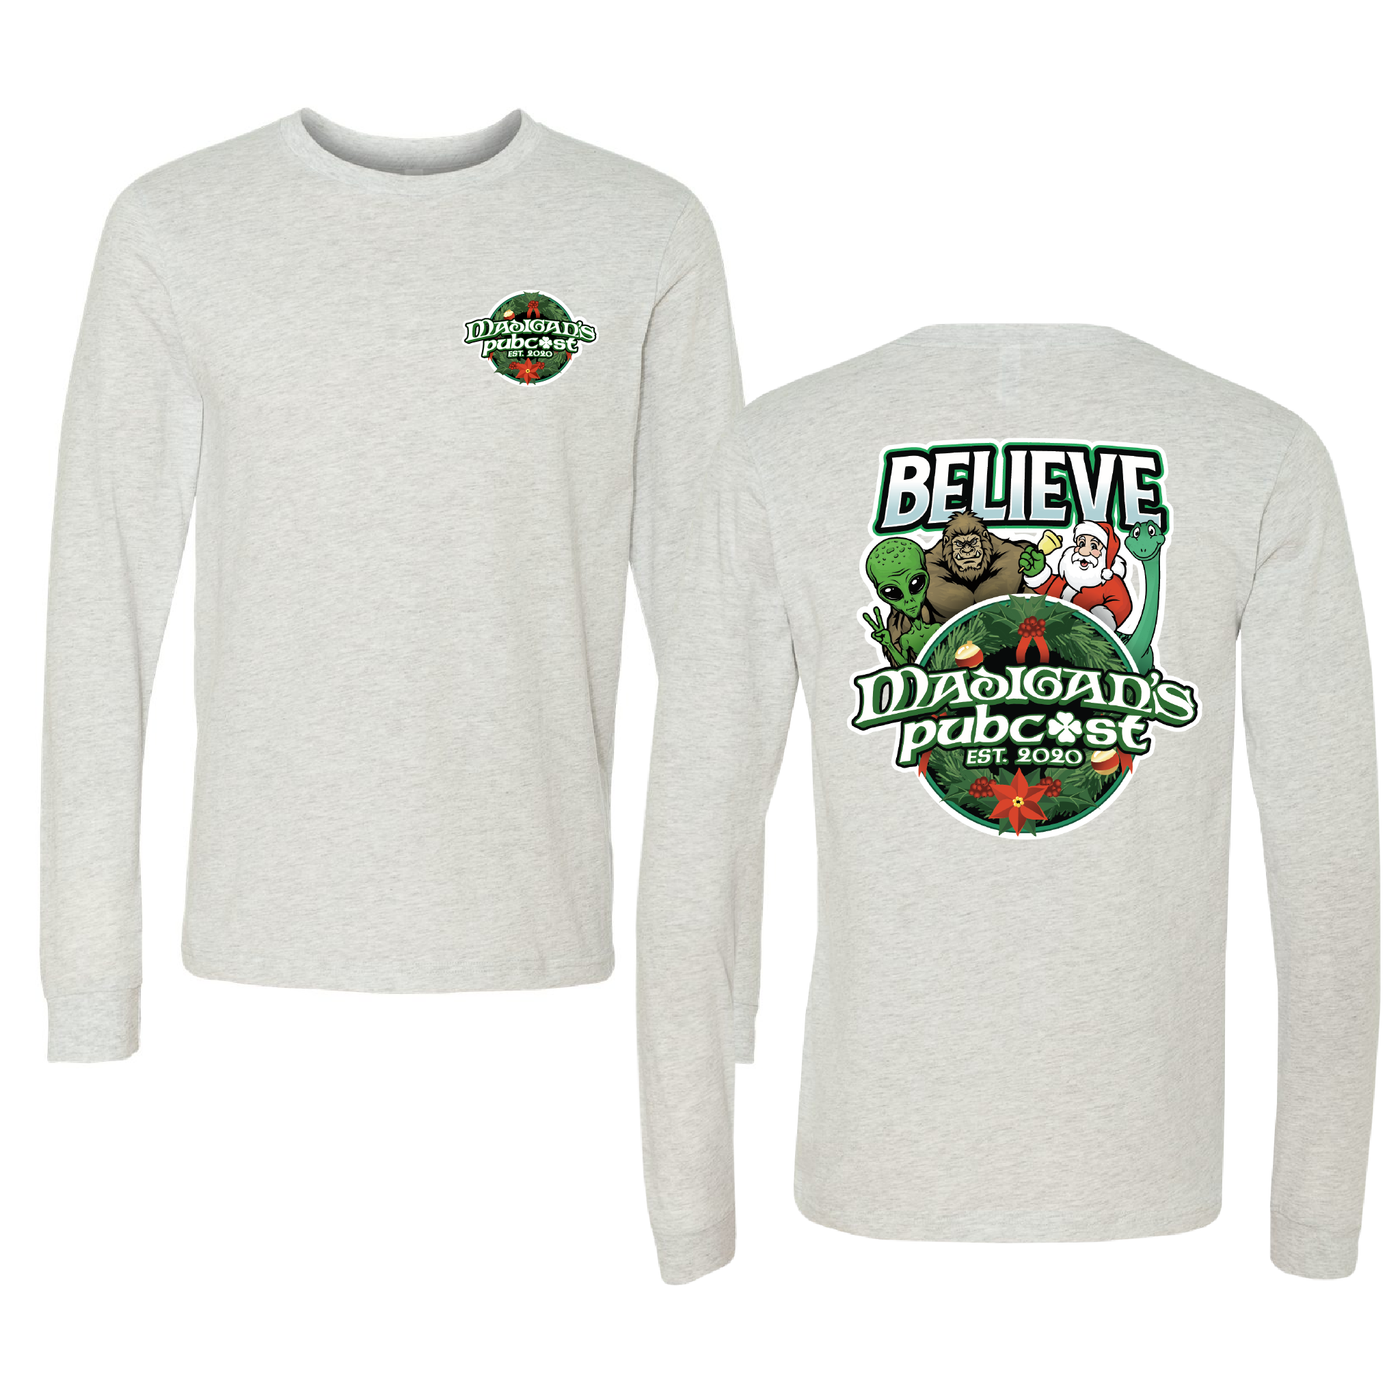 Limited Edition Madigan’s Pubcast Holiday “Believe” Long-Sleeved T-Shirt